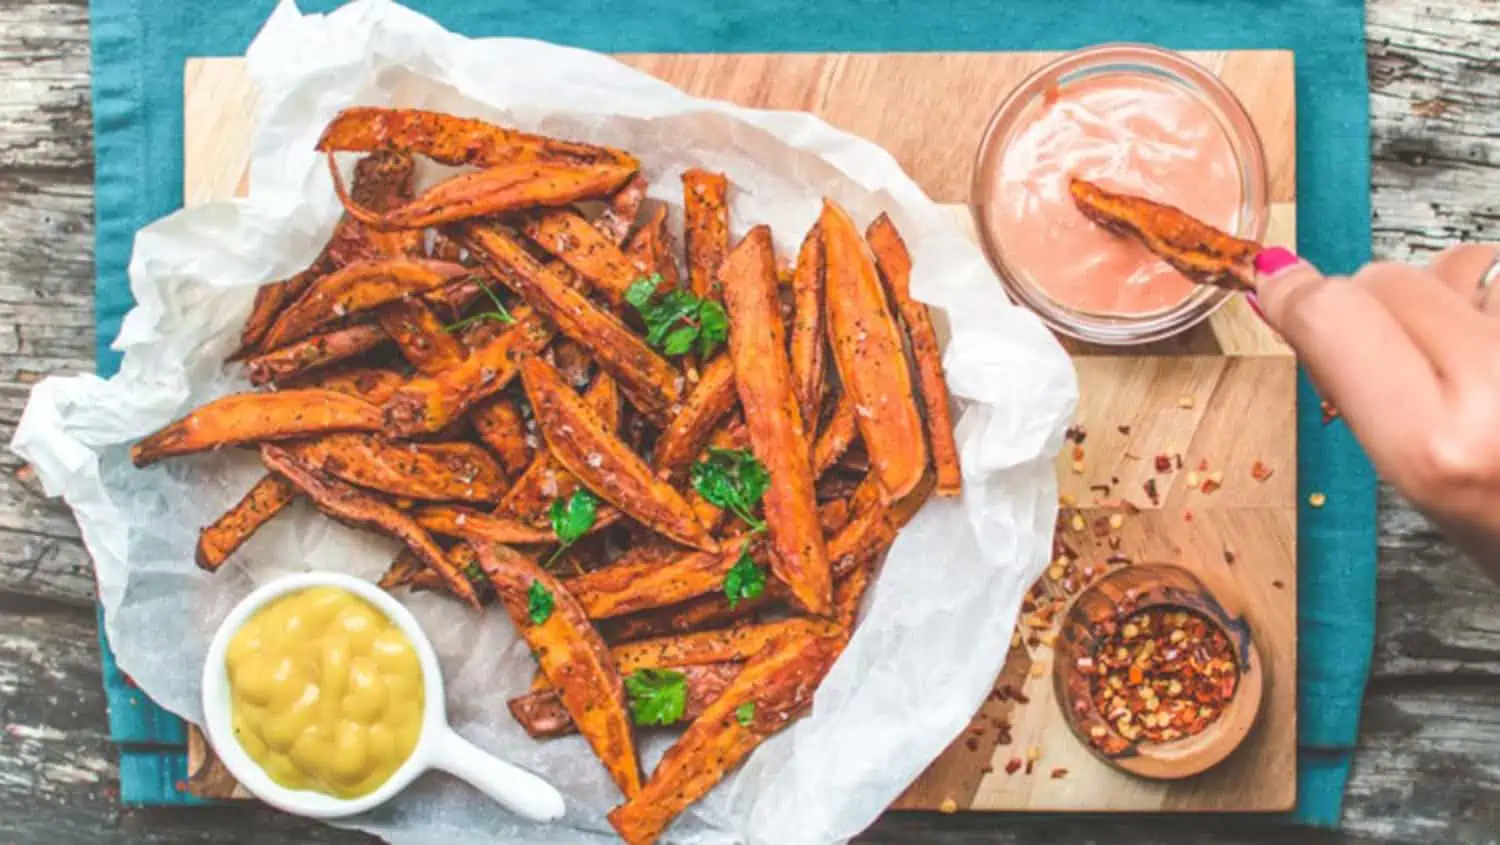 plate of sweet potato fries with a side of mustard and a hand dipping a fry into special sauce in the upper right-hand corner